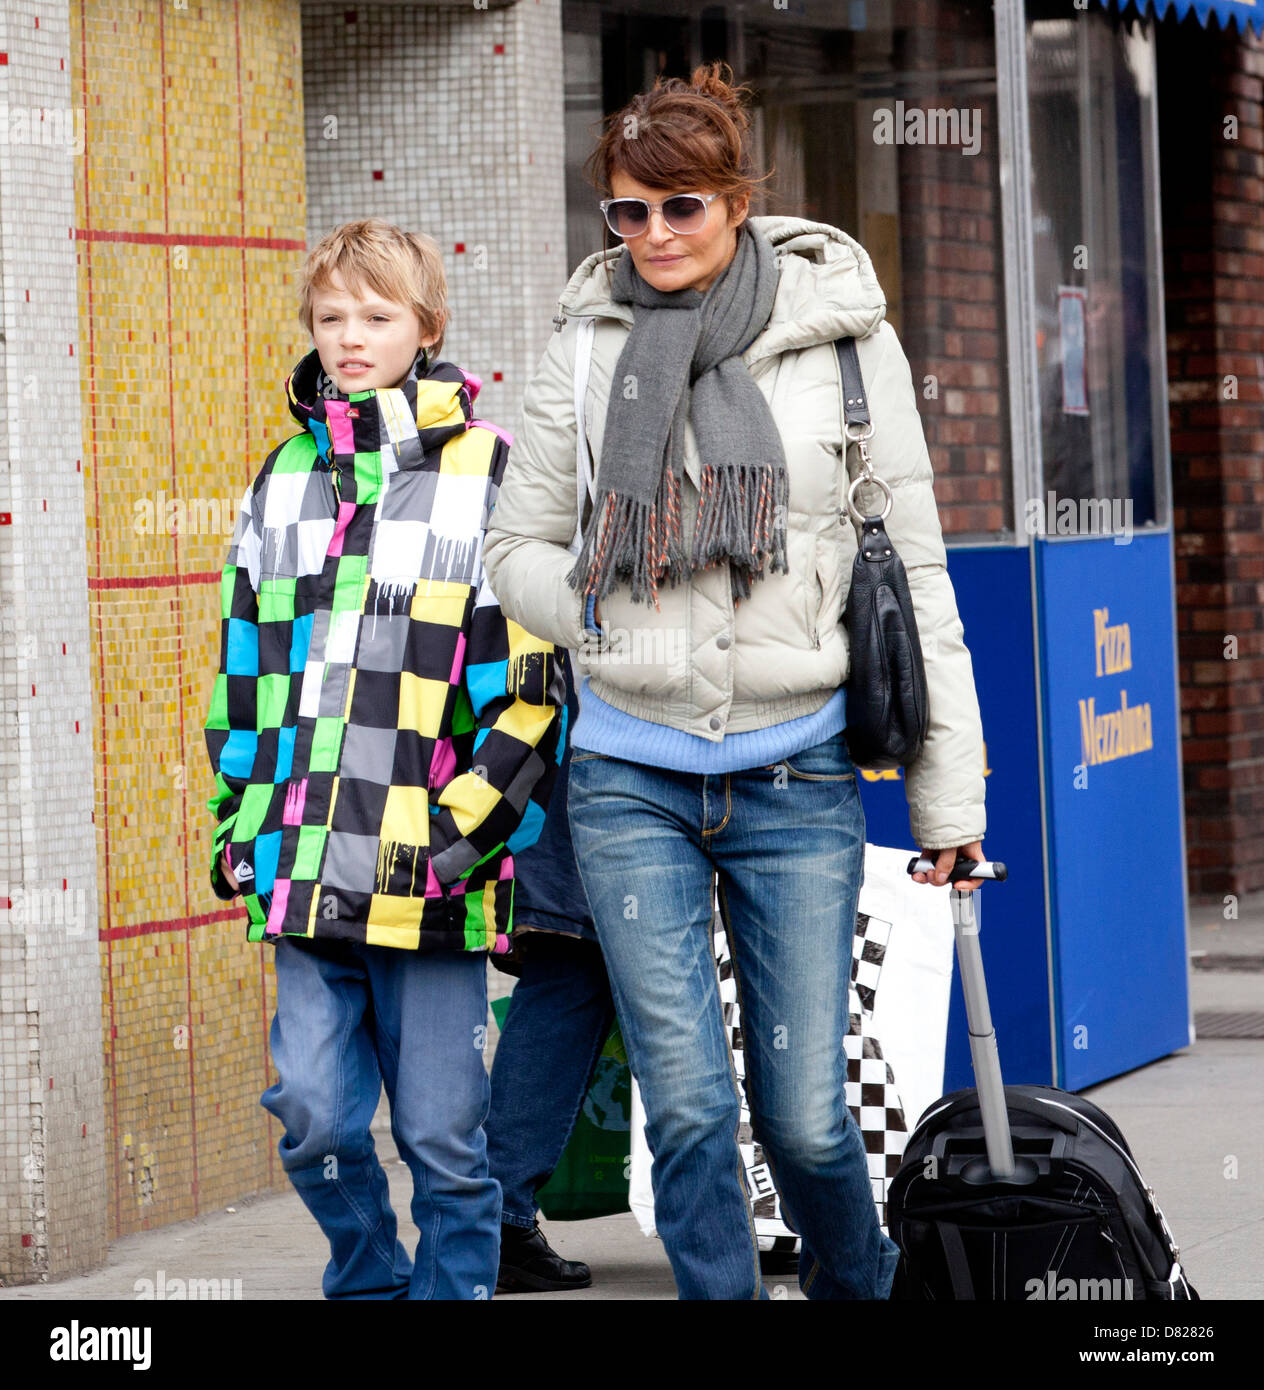 Mingus Reedus And Christensen High Resolution Stock Photography and Images Alamy